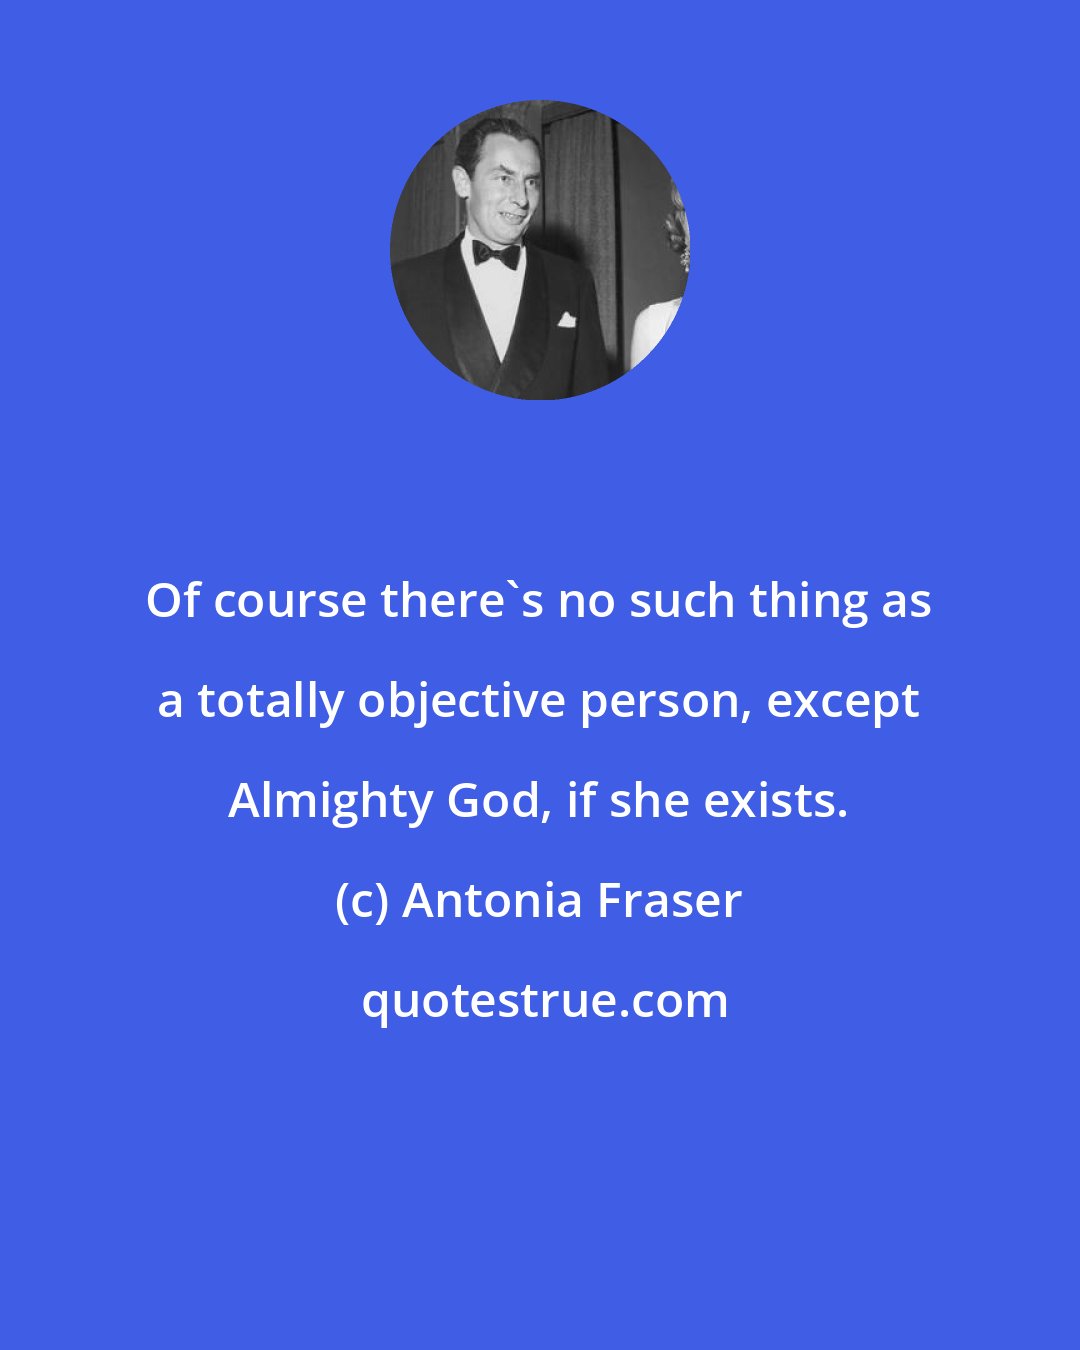 Antonia Fraser: Of course there's no such thing as a totally objective person, except Almighty God, if she exists.